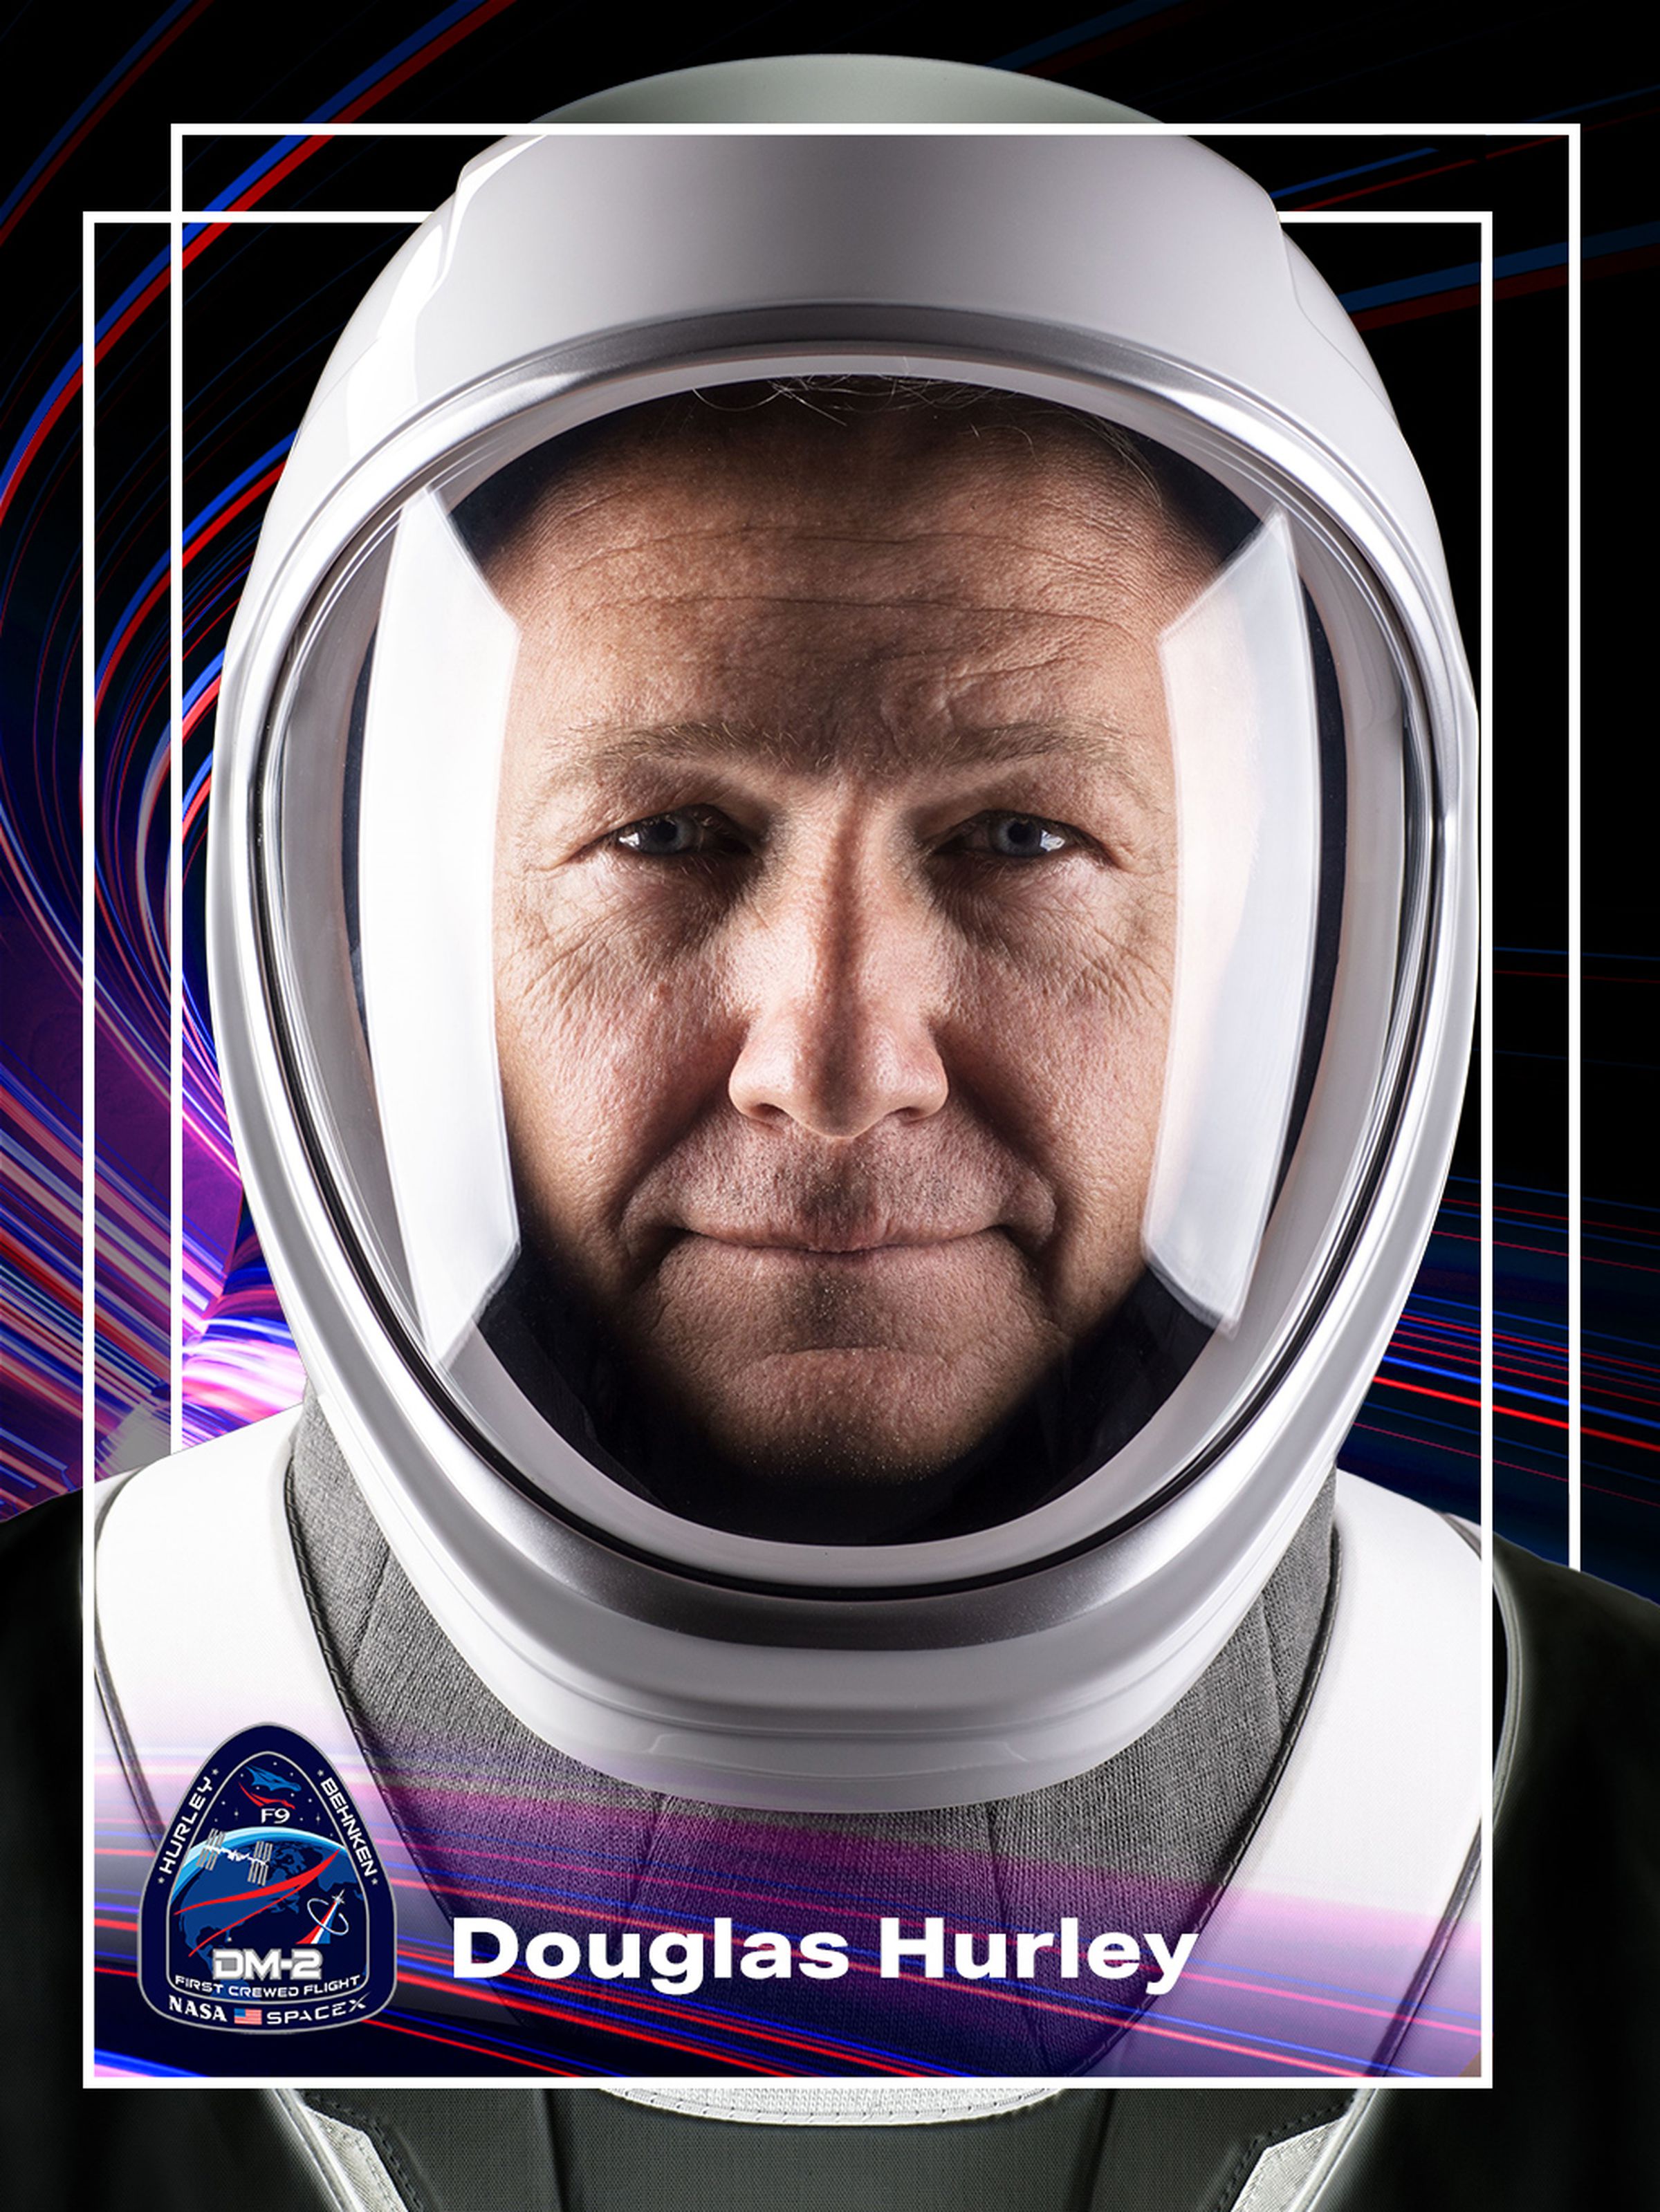 A graphic of astronaut Douglas Hurley made to look like the front of a trading card